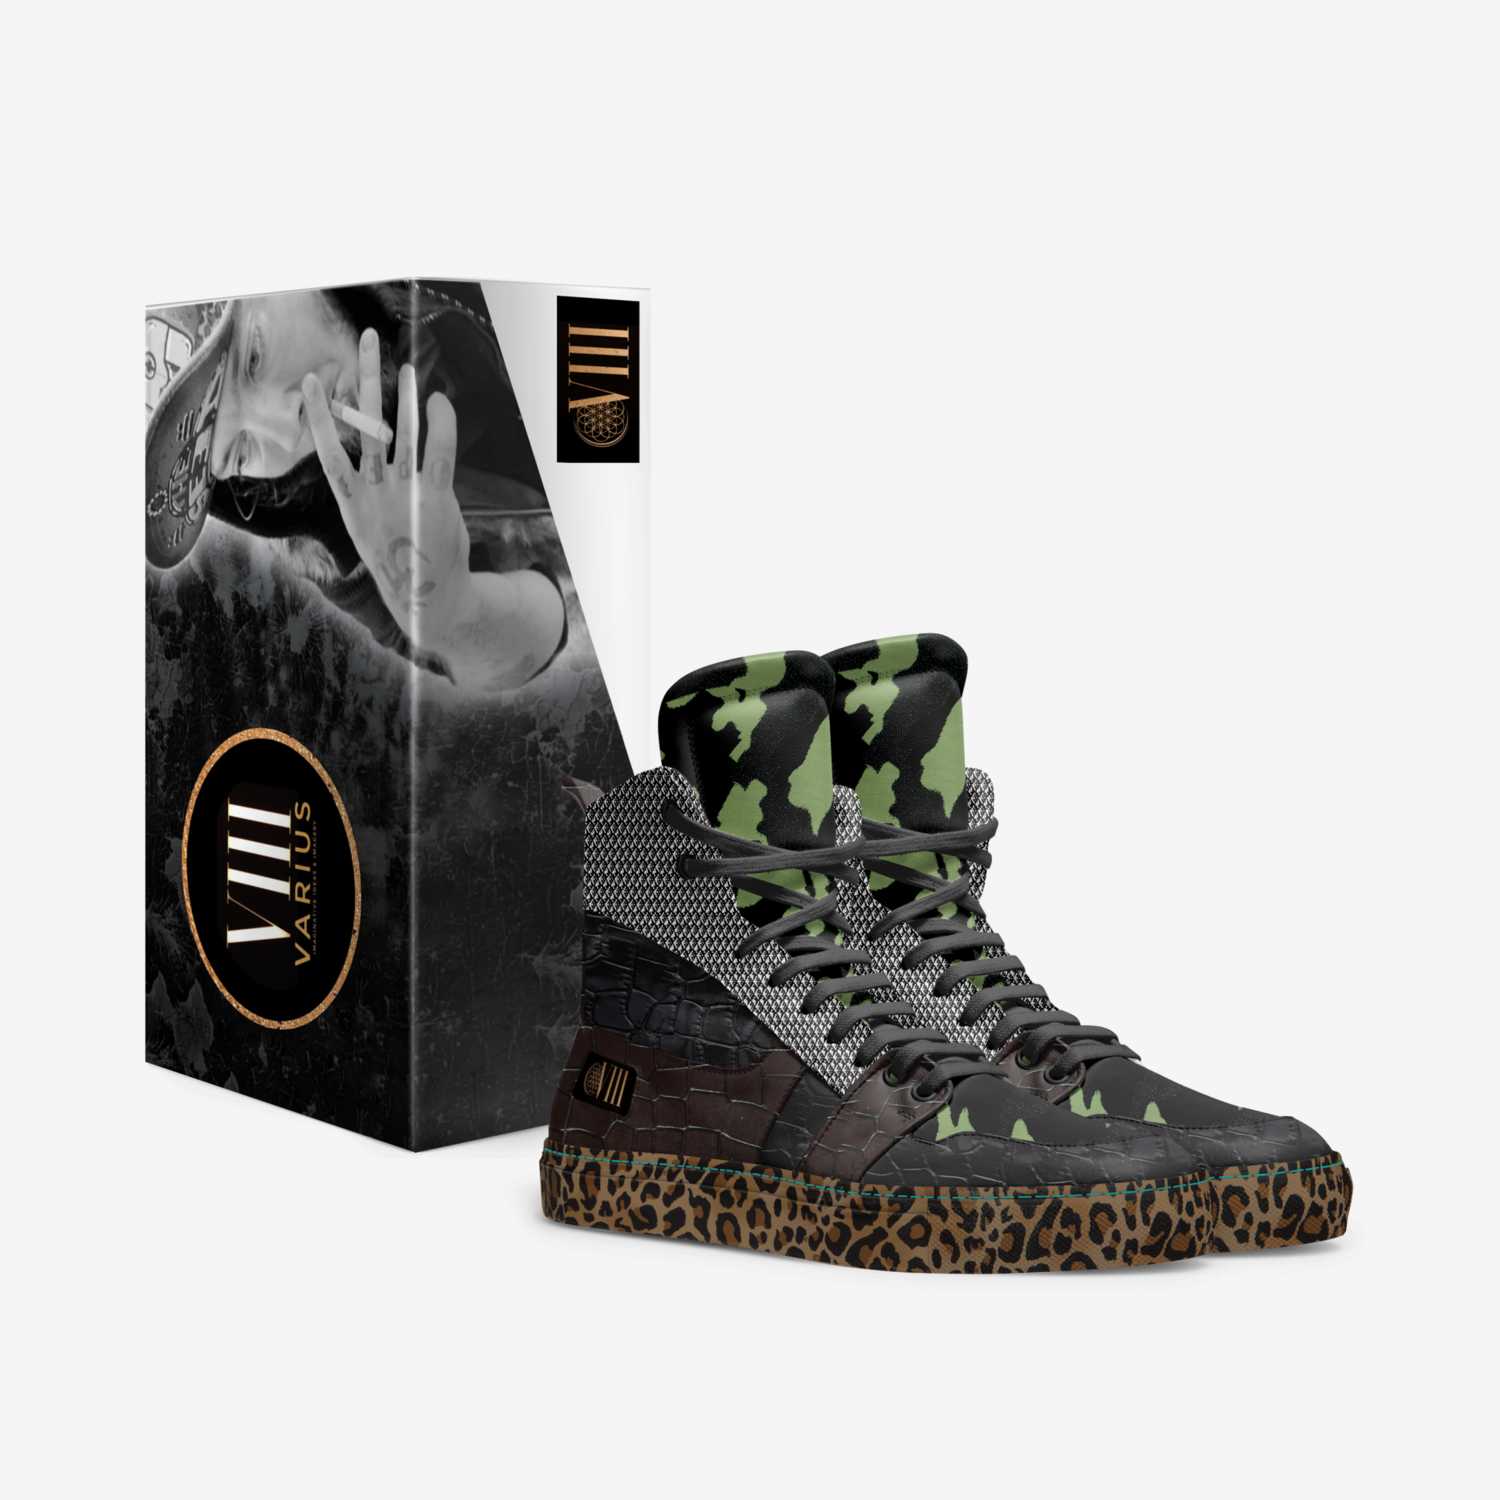 Jungle Kiks custom made in Italy shoes by Varius Viii | Box view